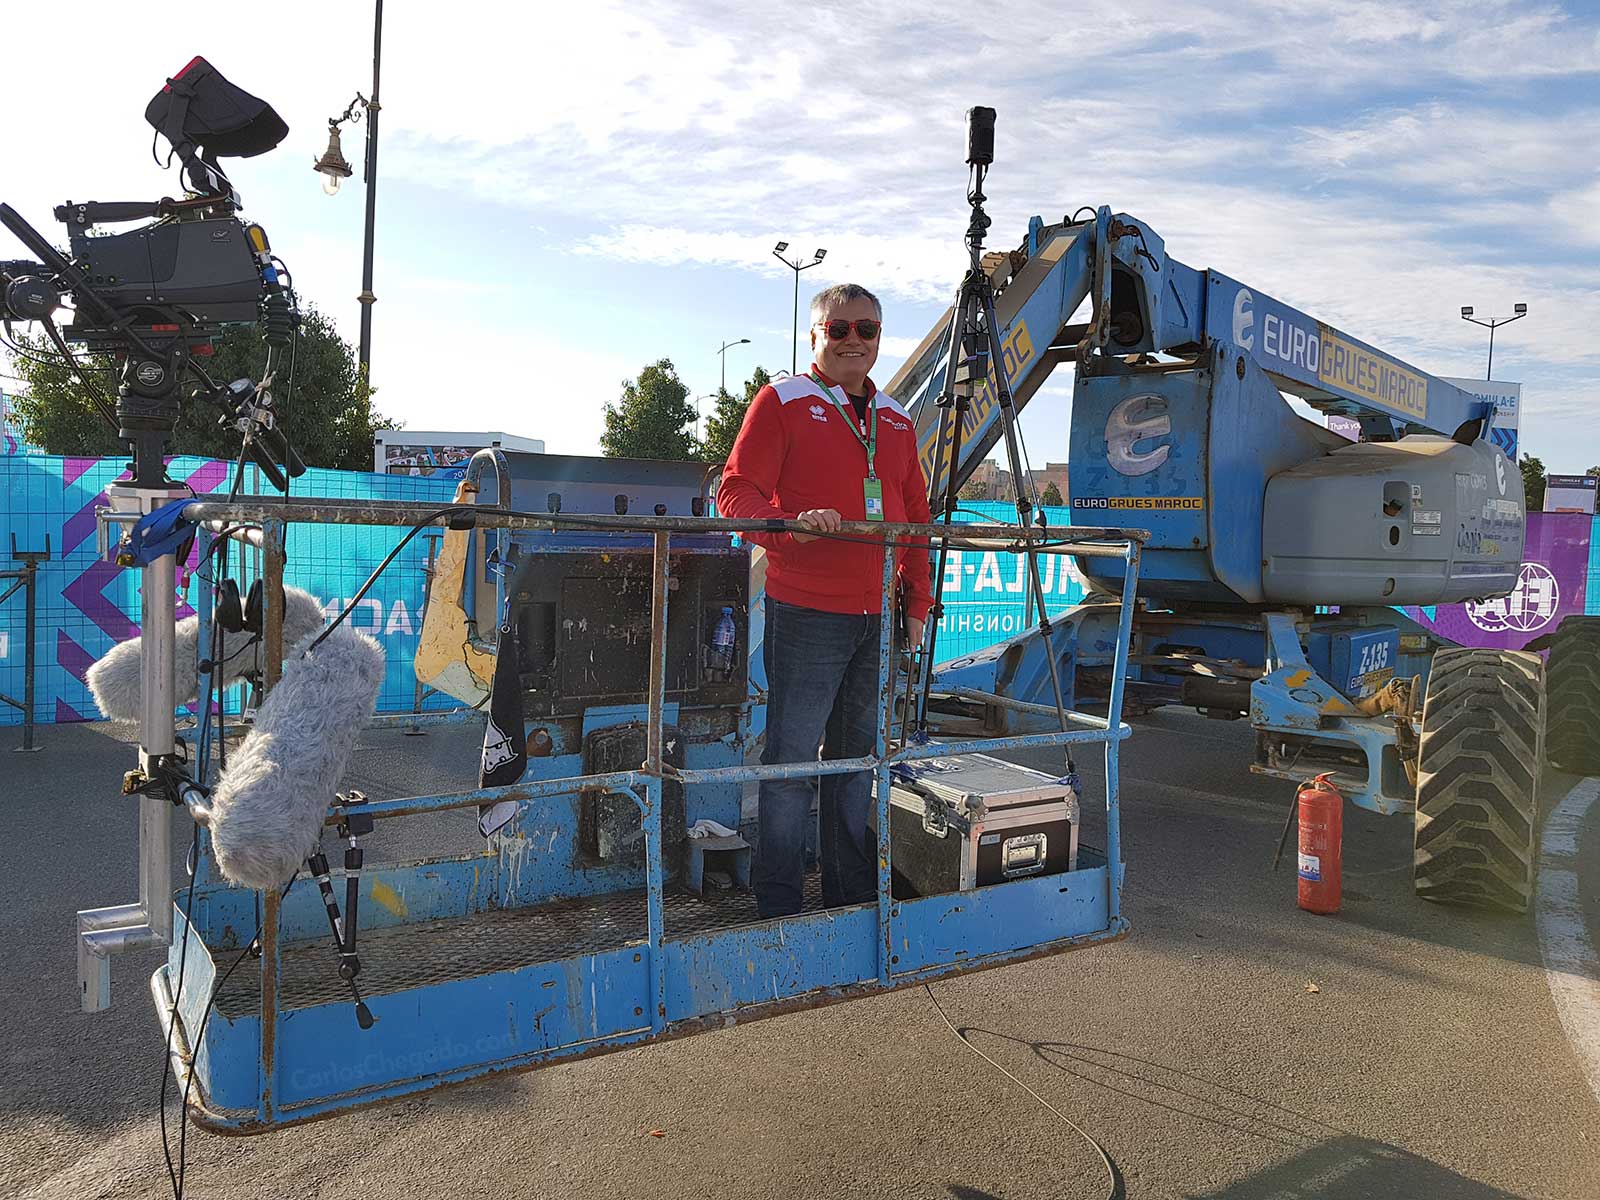 Carlos Chegado and the ZCAM S1 on the Crane at Marrakesh ePrix